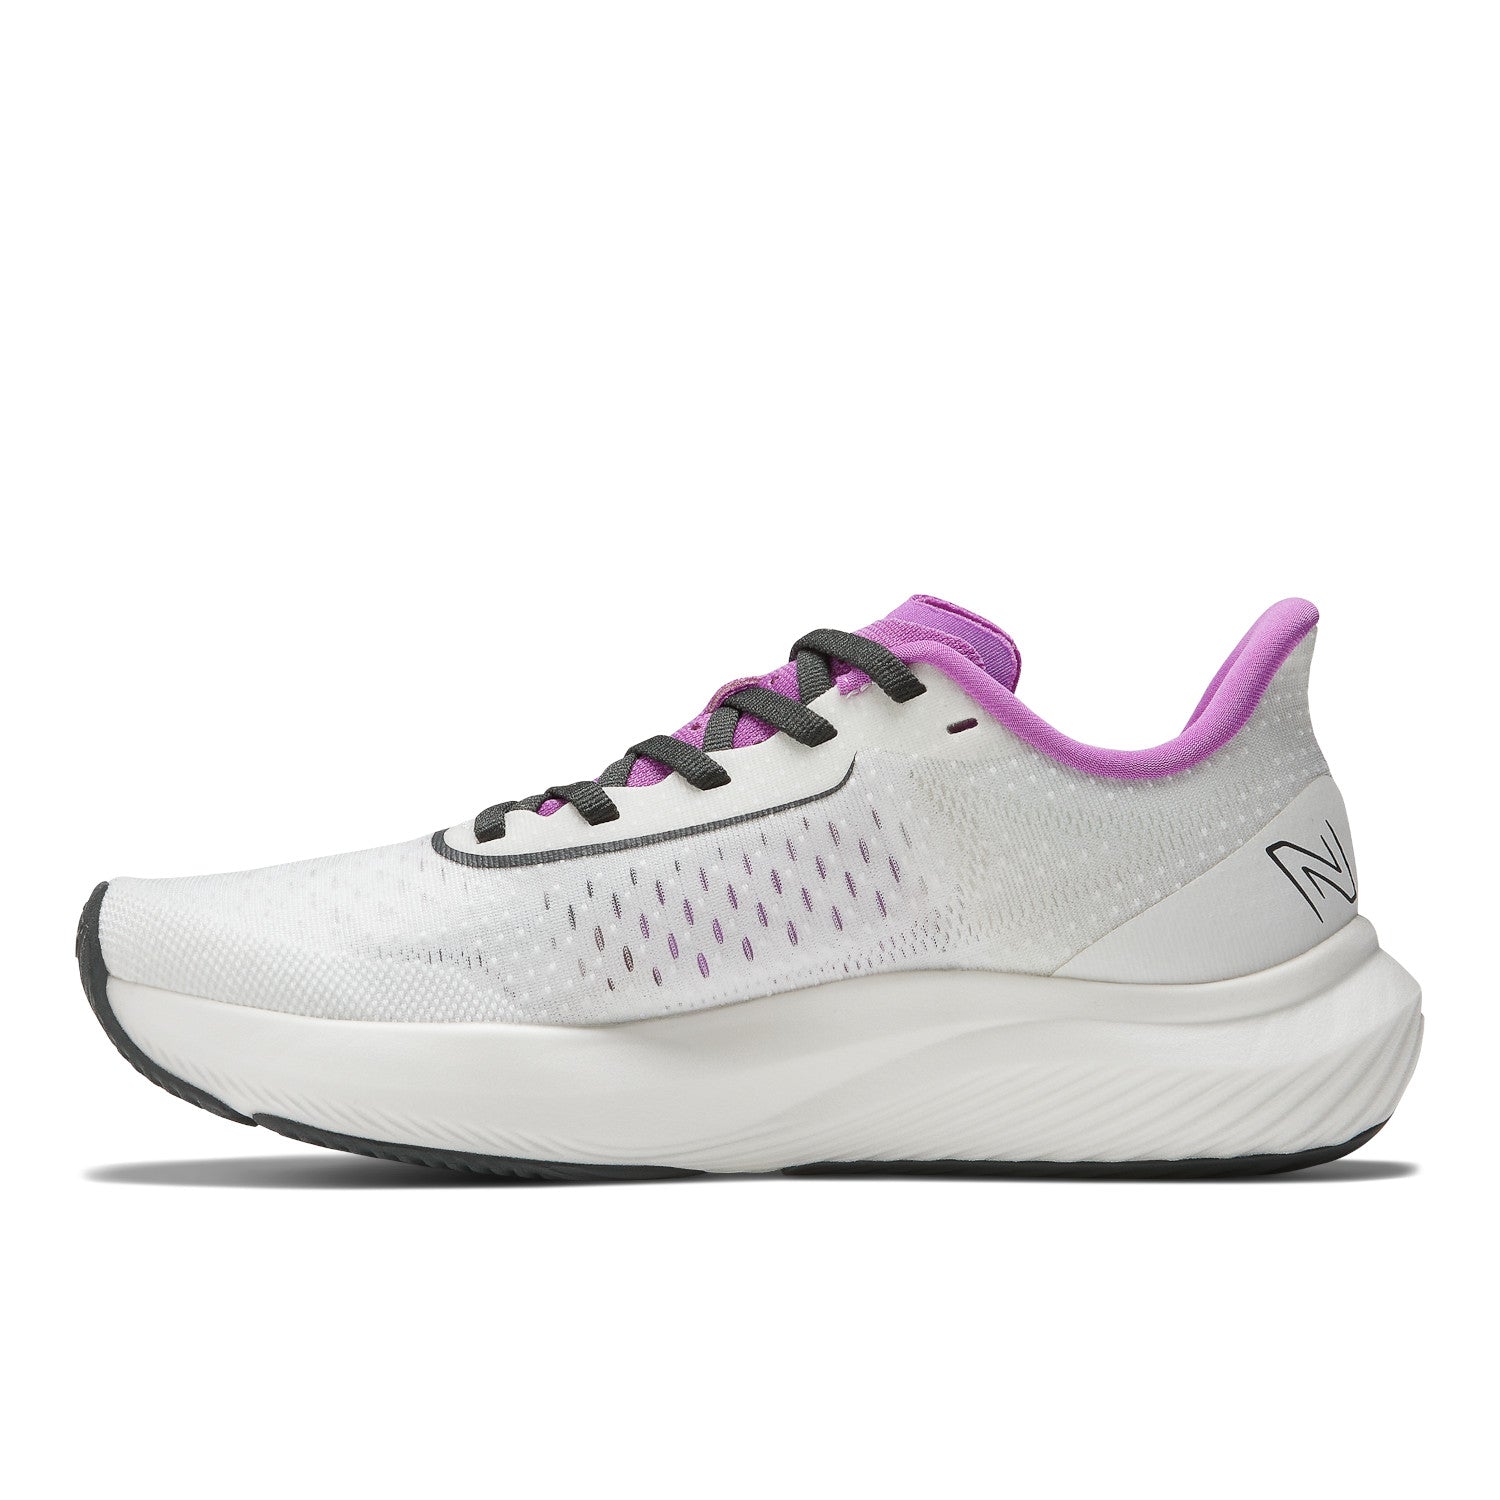 New Balance FuelCell Rebel v3 WFCXCW3 Women's3